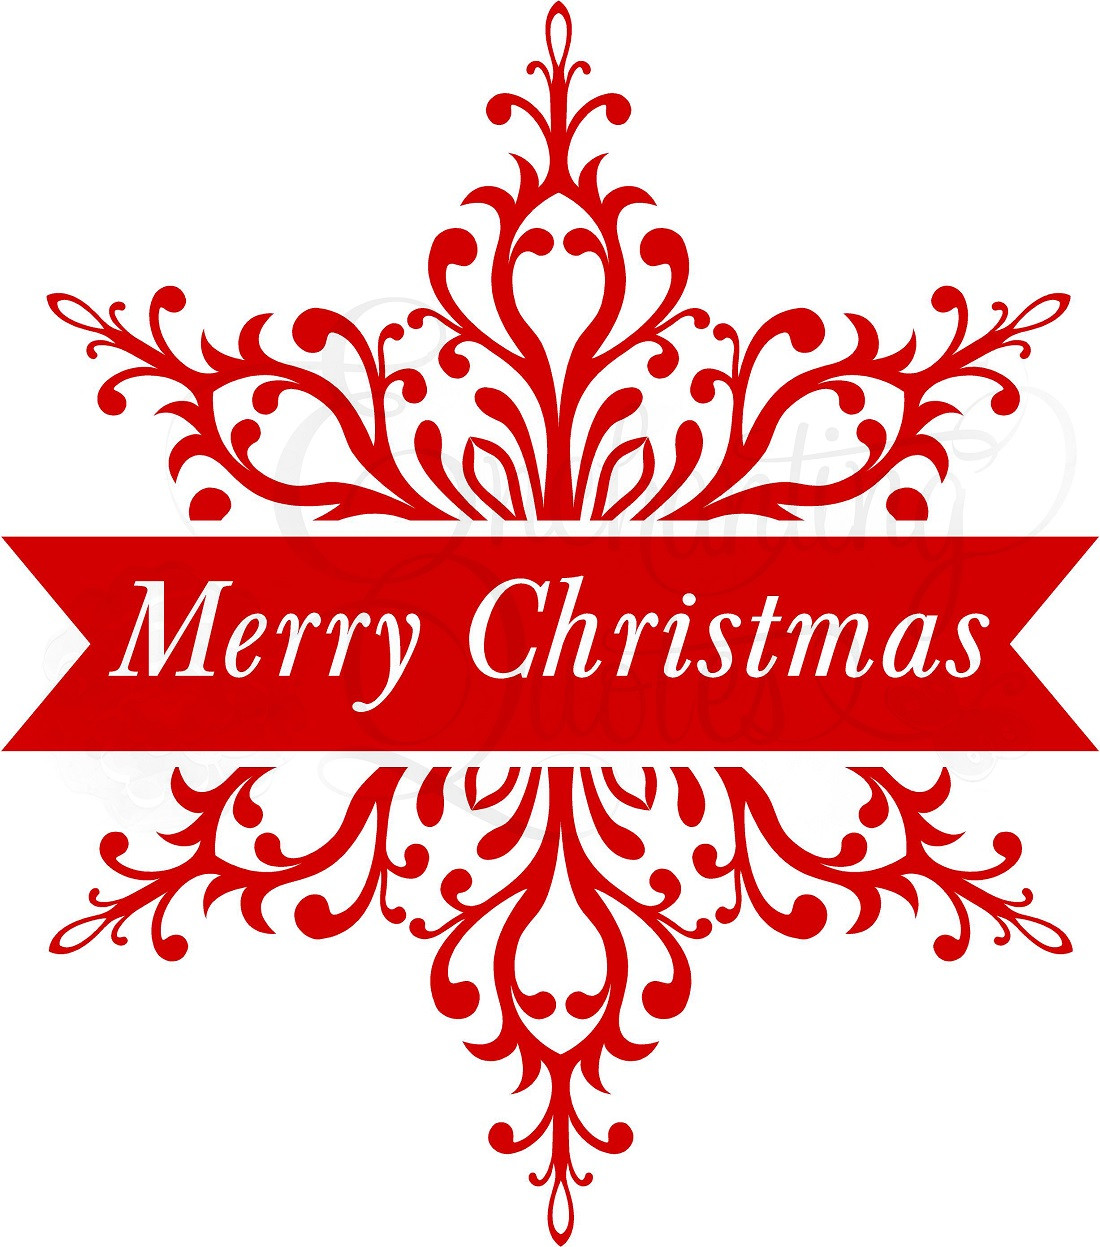 Merry Christmas Quotes And Images
 Merry Christmas Quotes QuotesGram